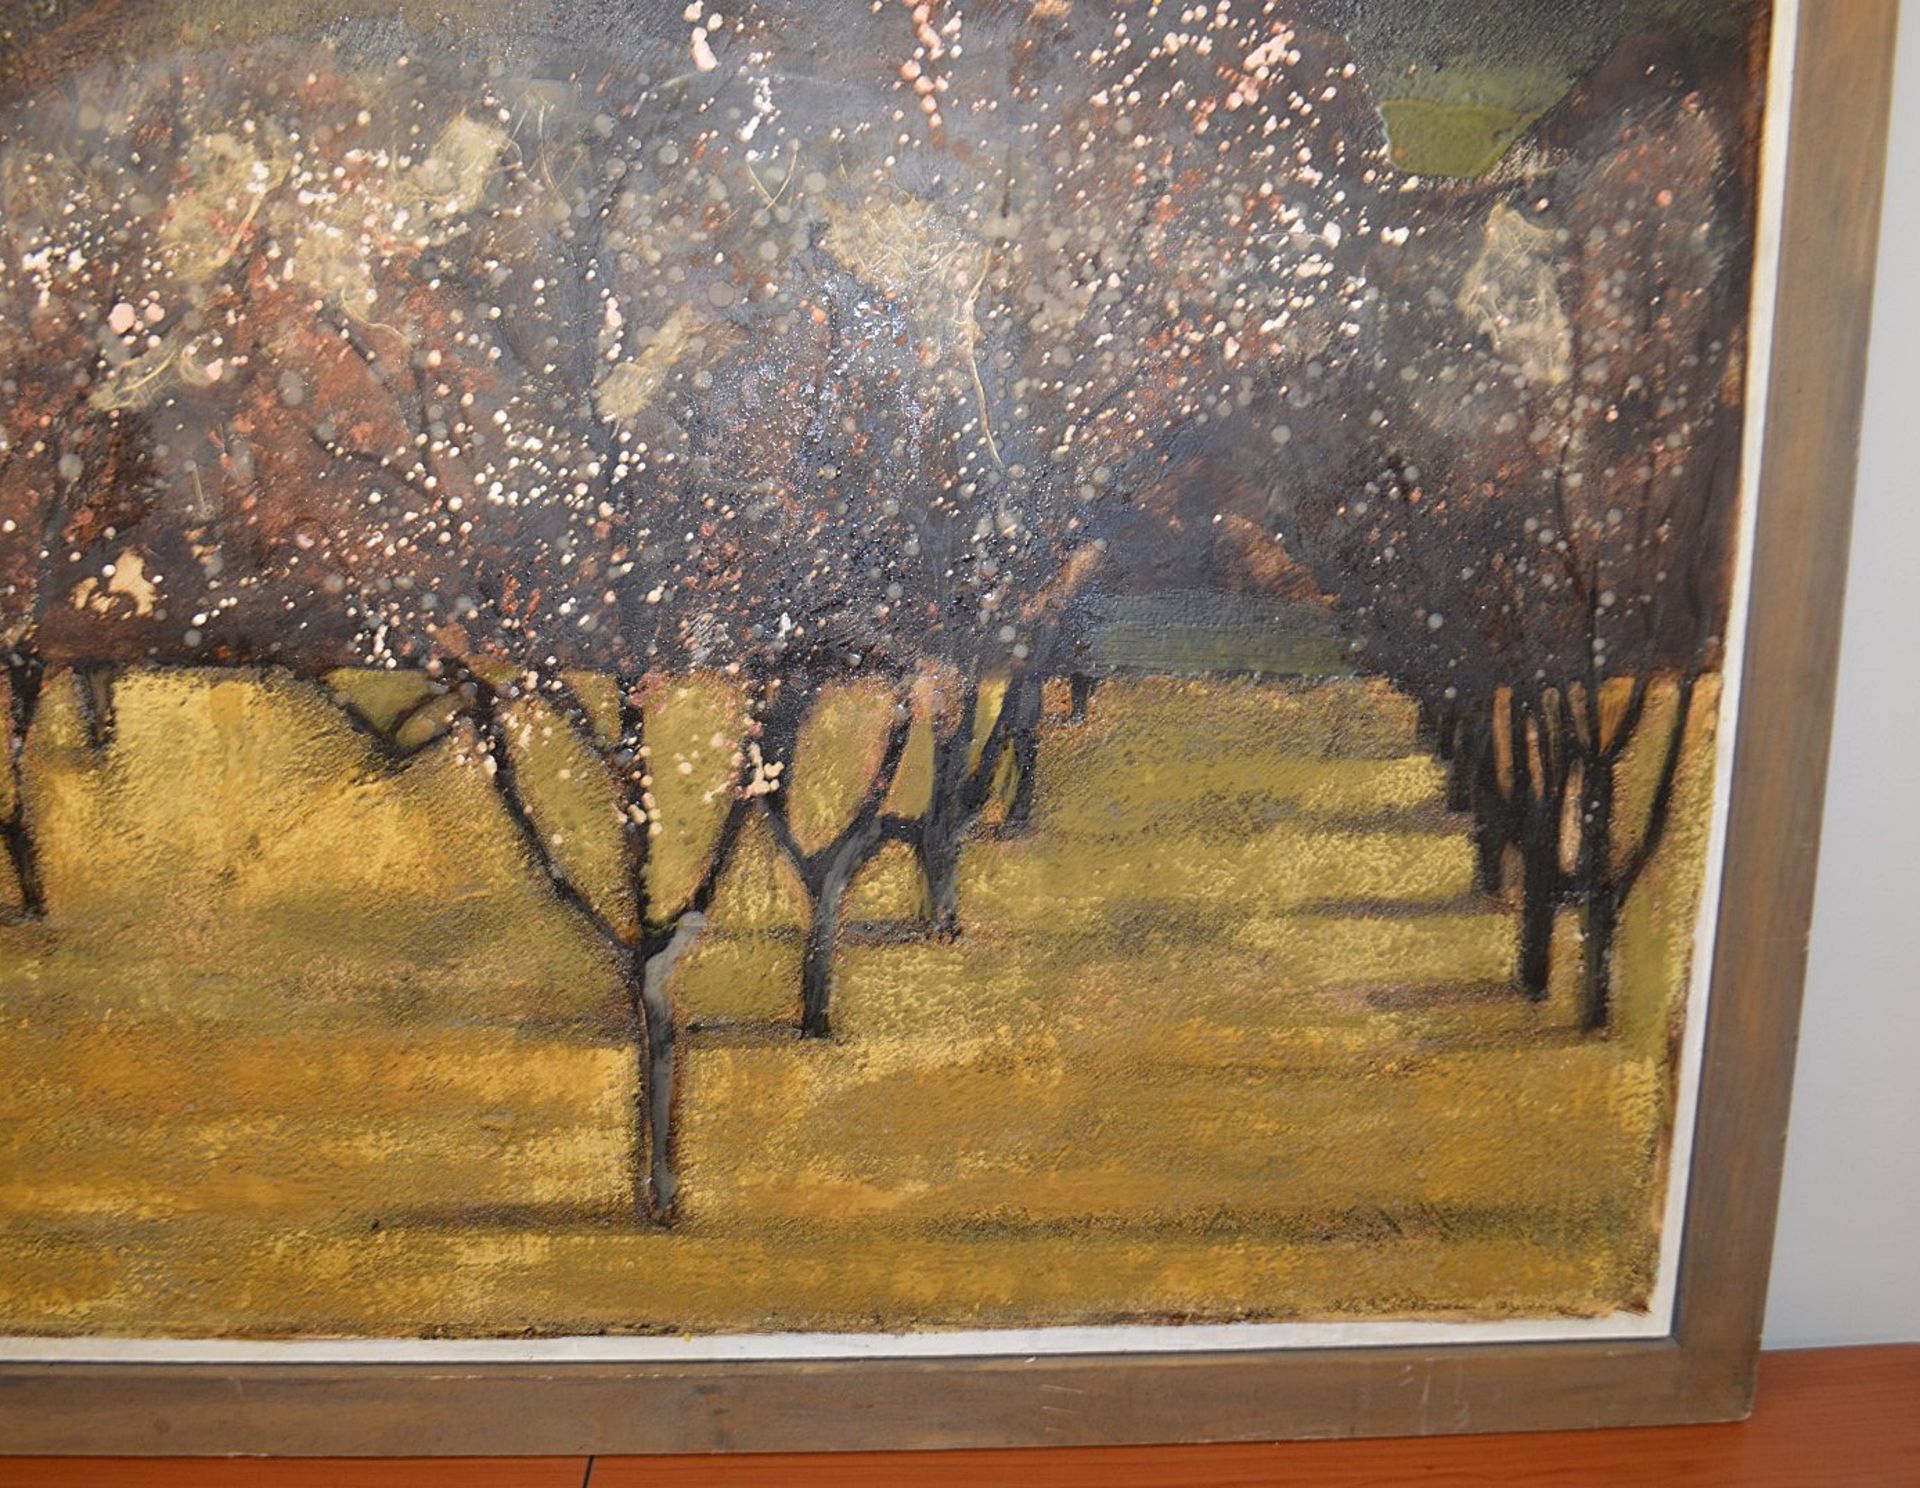 1 x Original Signed Framed Painting Of A Spanish Orchard By Lydia Bauman (1997) - Dimensions: 122 - Image 5 of 8